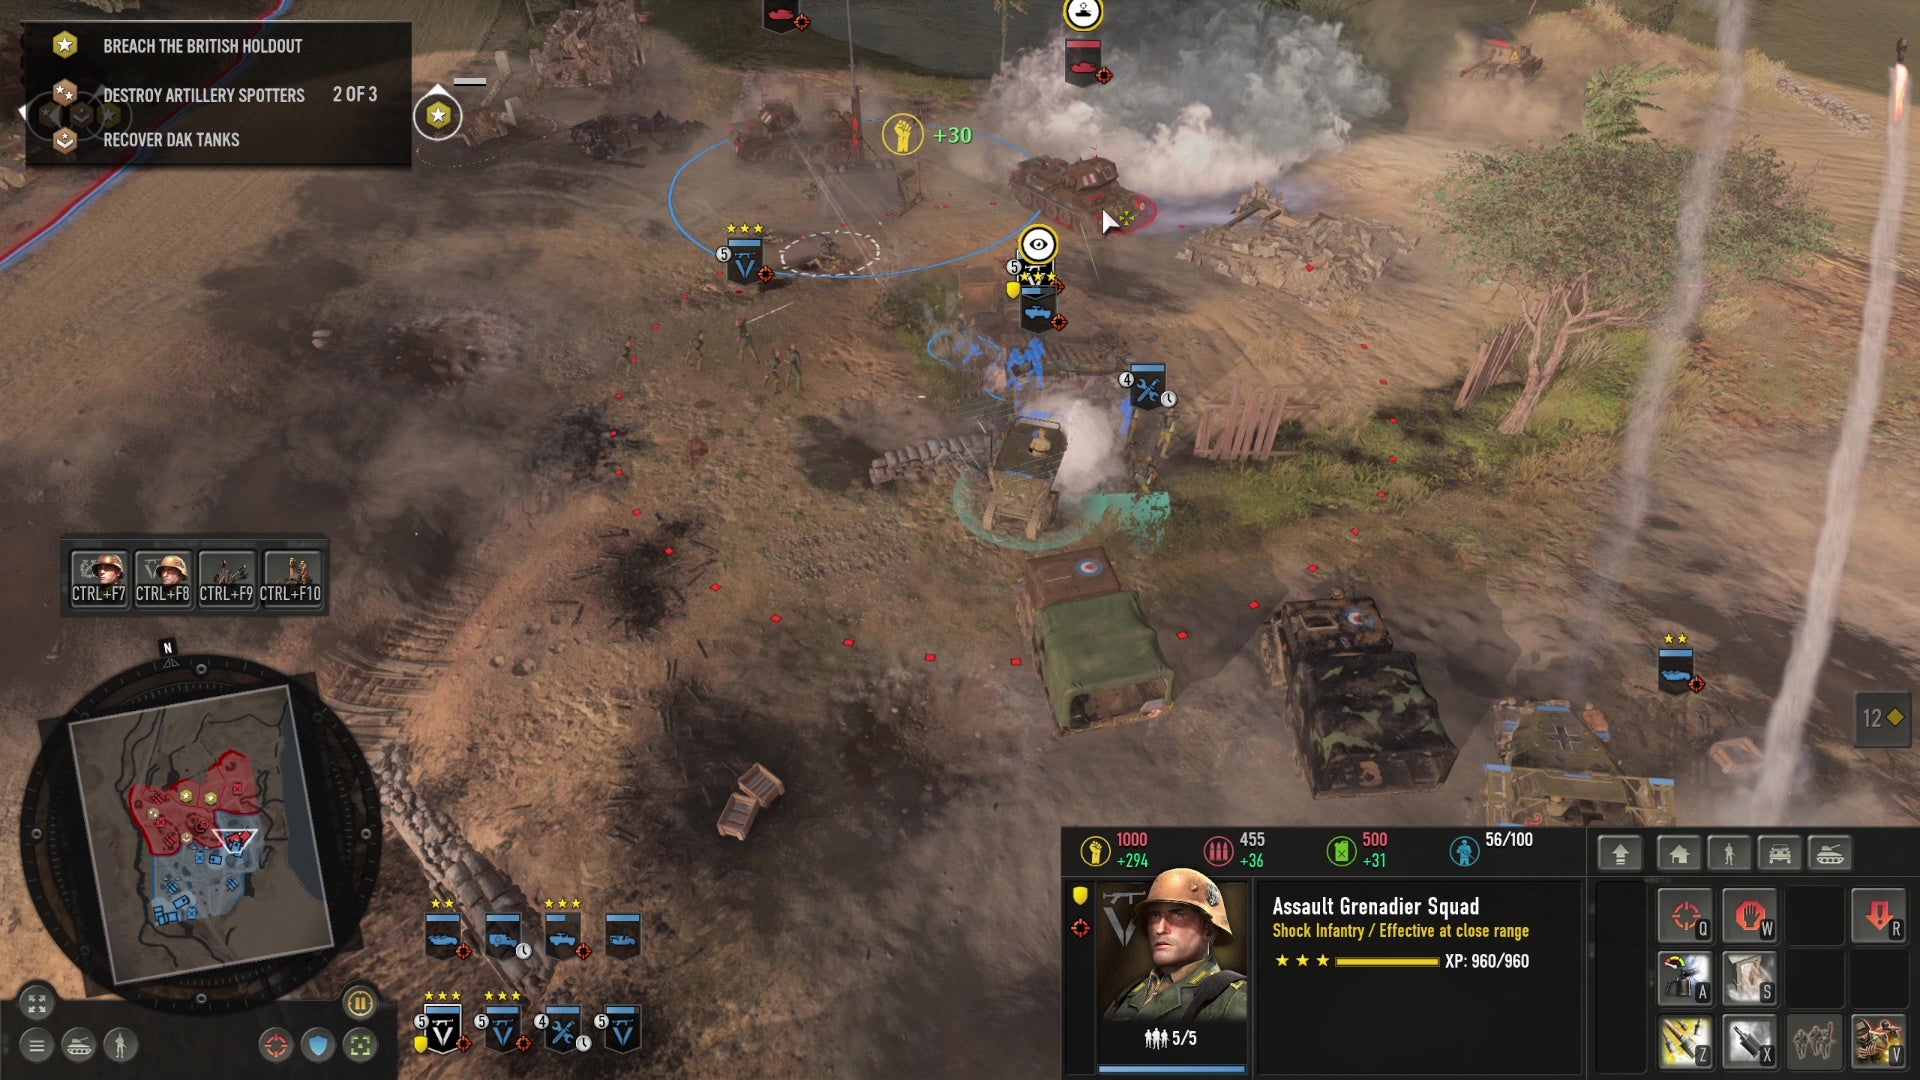 Tanks emerge from the mist as soldiers do battle in the desert in Company Of Heroes 3